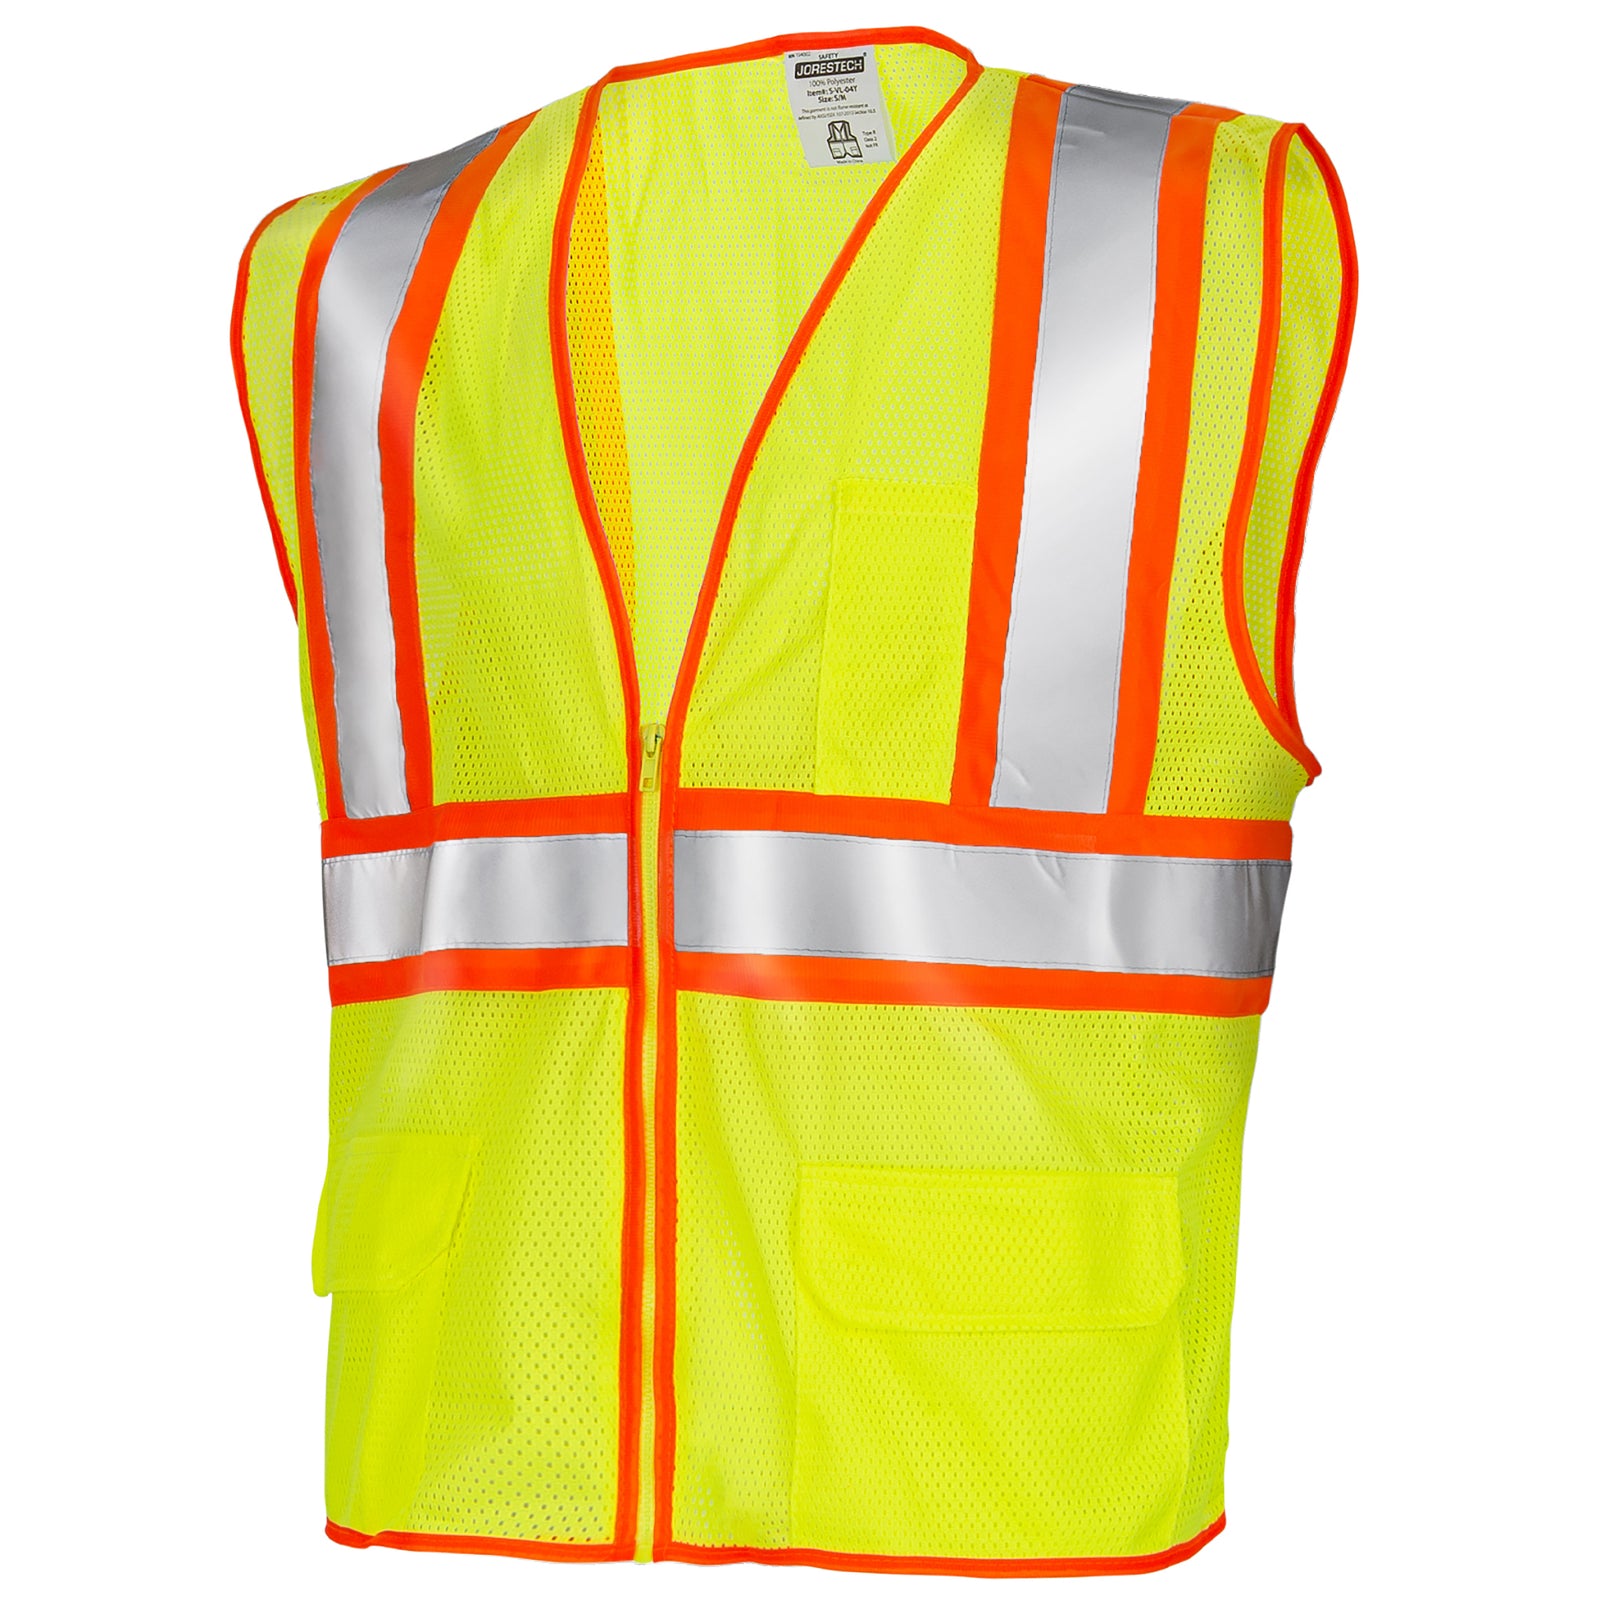 Diagonal view of the JORESTECH printed hi-vis two tone mesh safety vest with 2 inches reflective strips